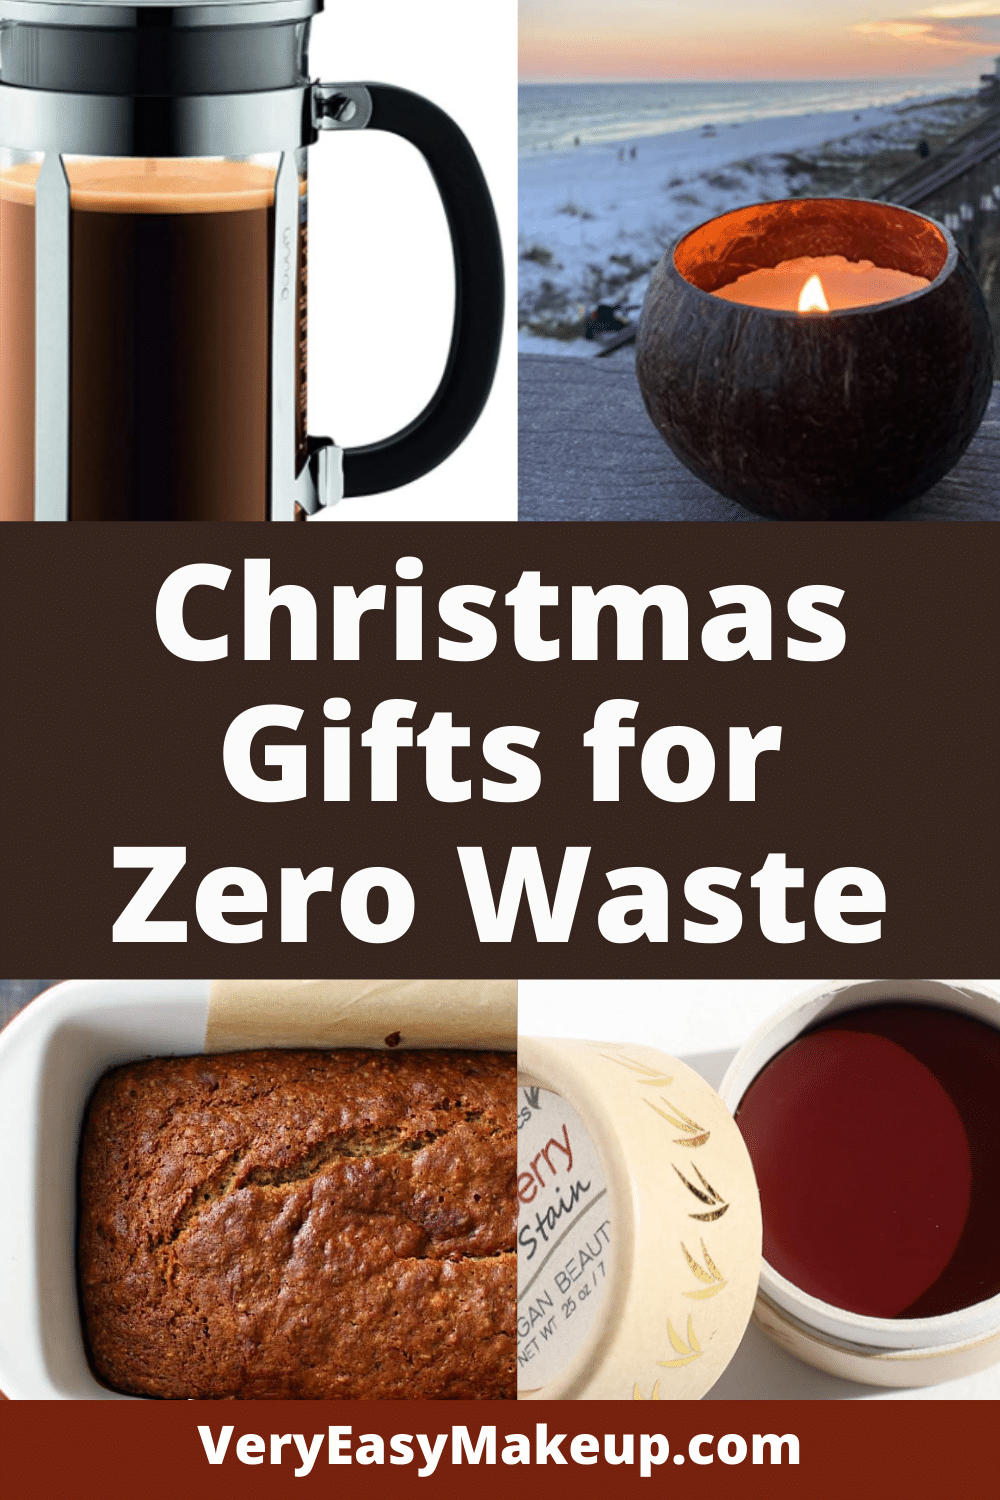 Christmas Gifts for Zero Waste by Very Easy Makeup